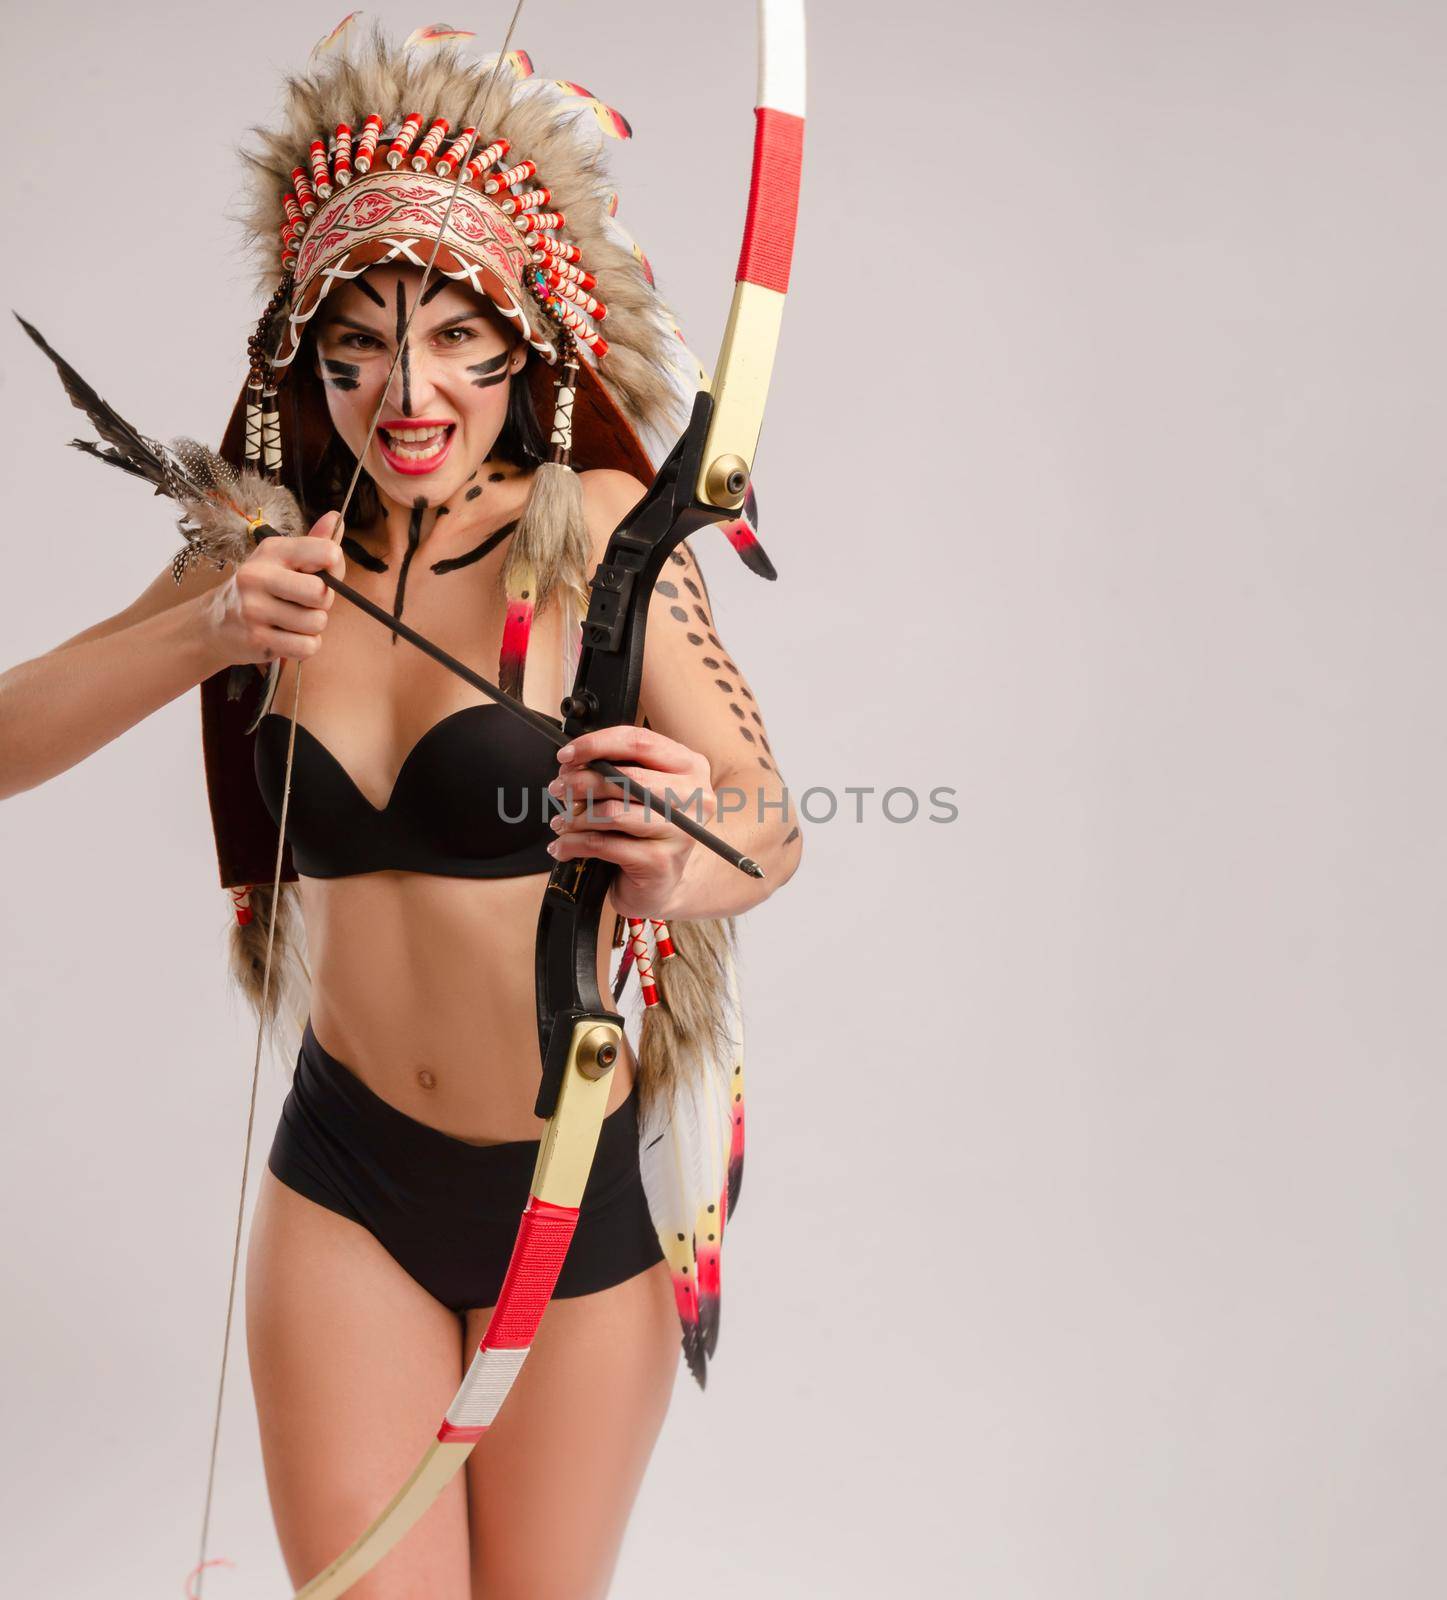 the woman in the image of indigenous peoples of America with a bow and arrow poses on a white background